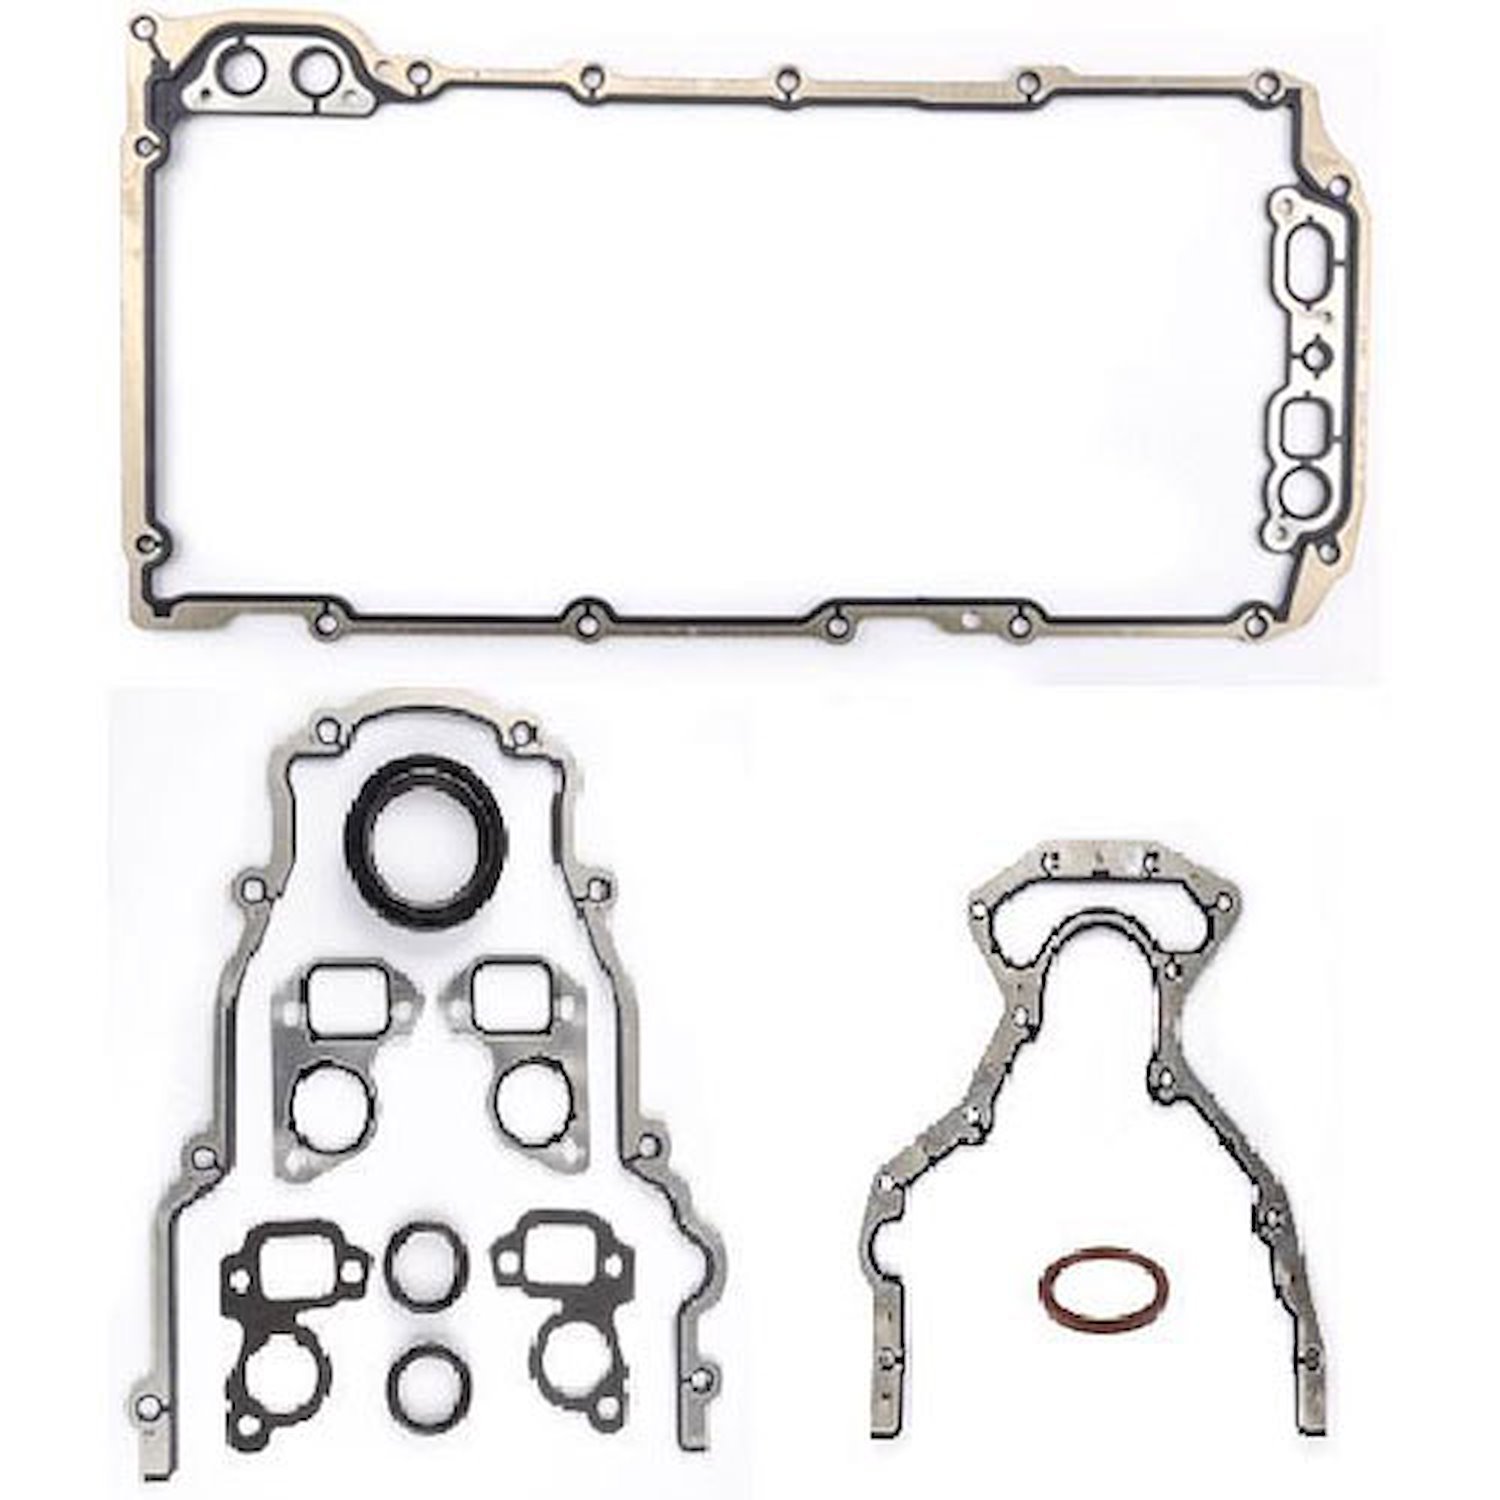 Gasket Kit - Lower for GM LS7 and LS9 Engines